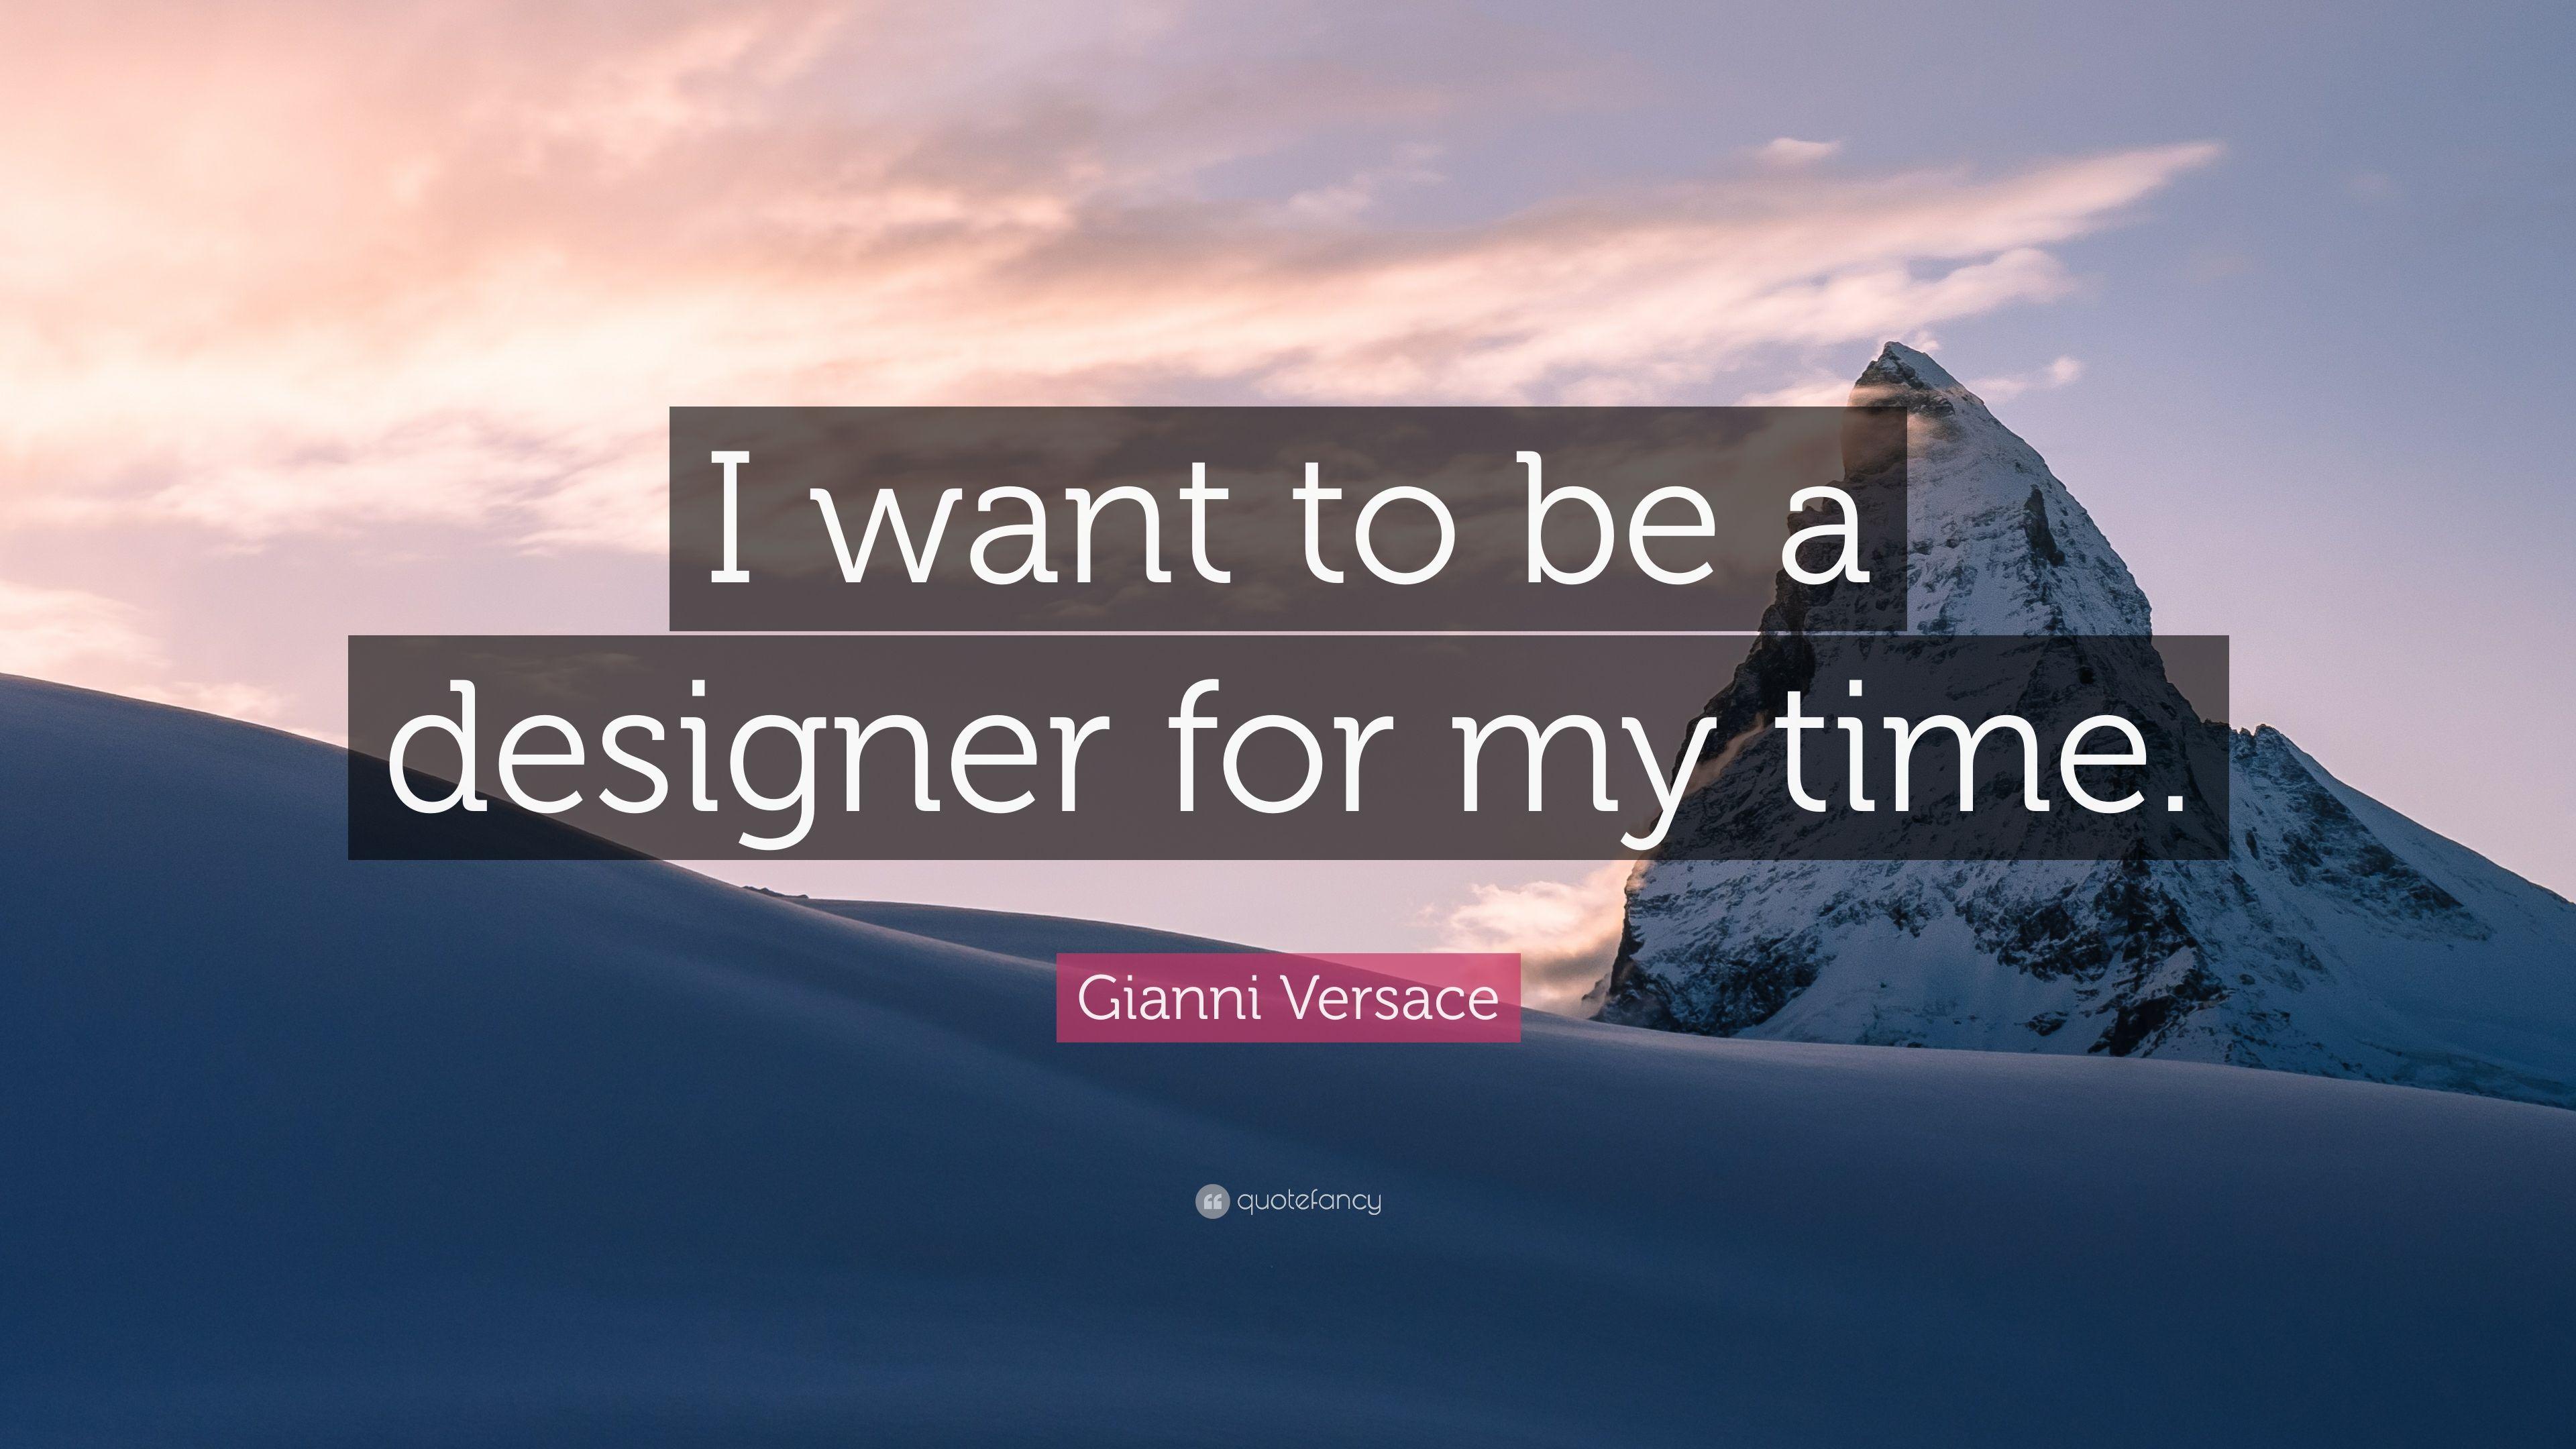 Gianni Versace Quote: “I want to be a designer for my time.” 9